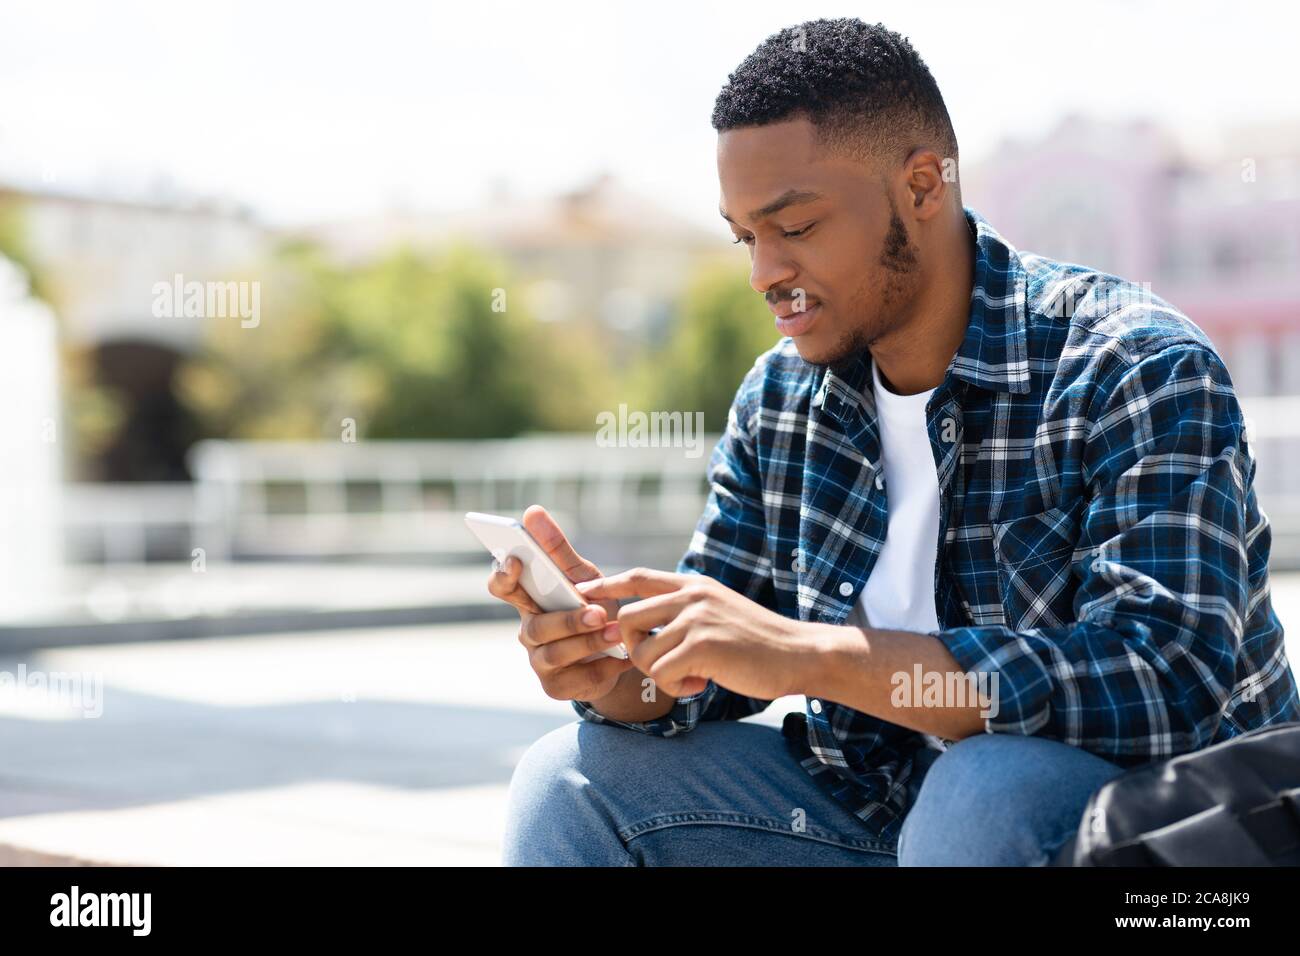 Portrait of black person texting sms on his smart phone Stock Photo